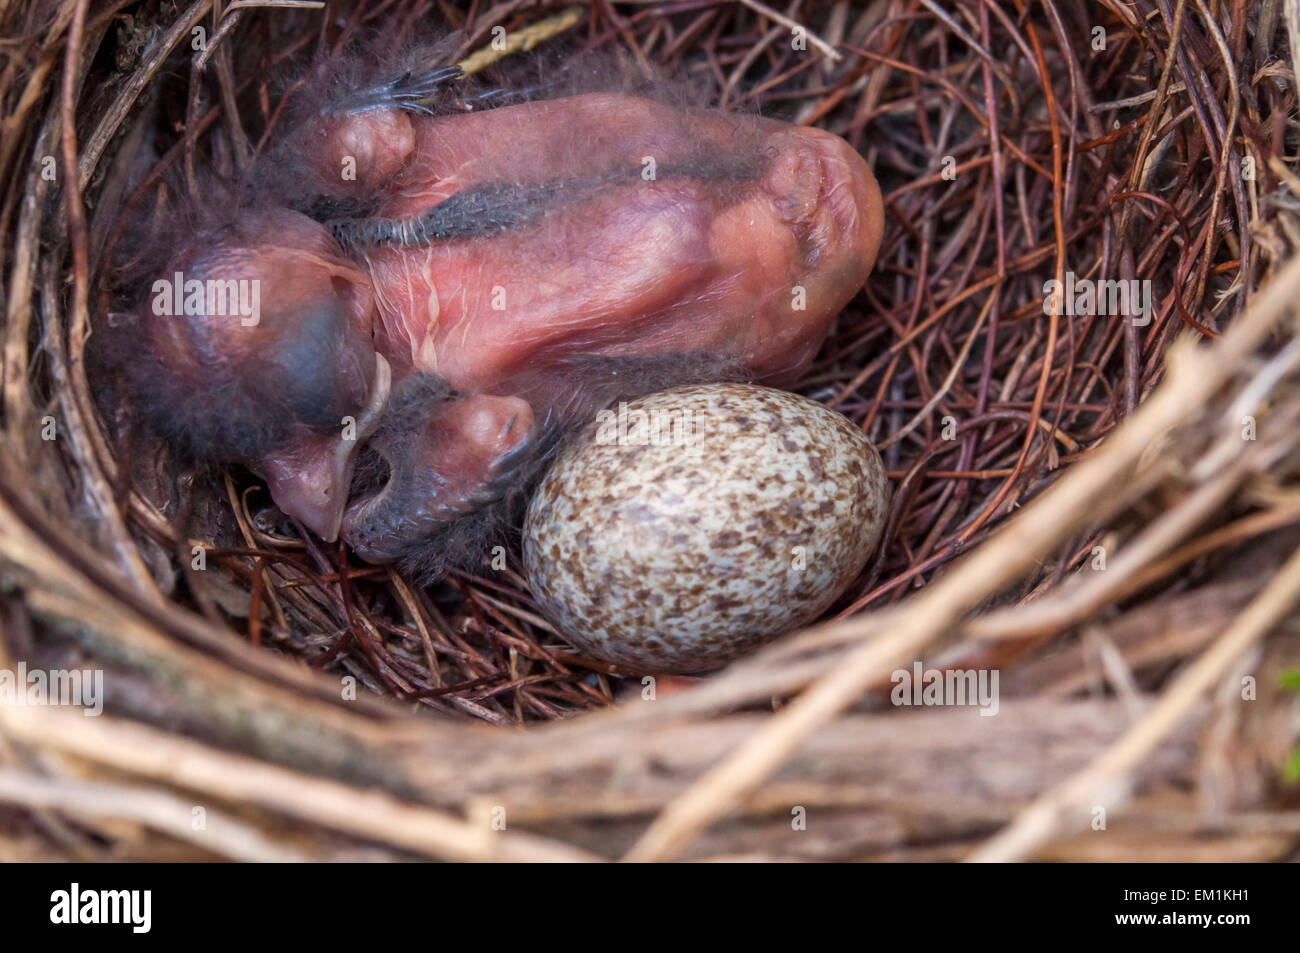 Cardinal baby bird by egg in nest Stock Photo